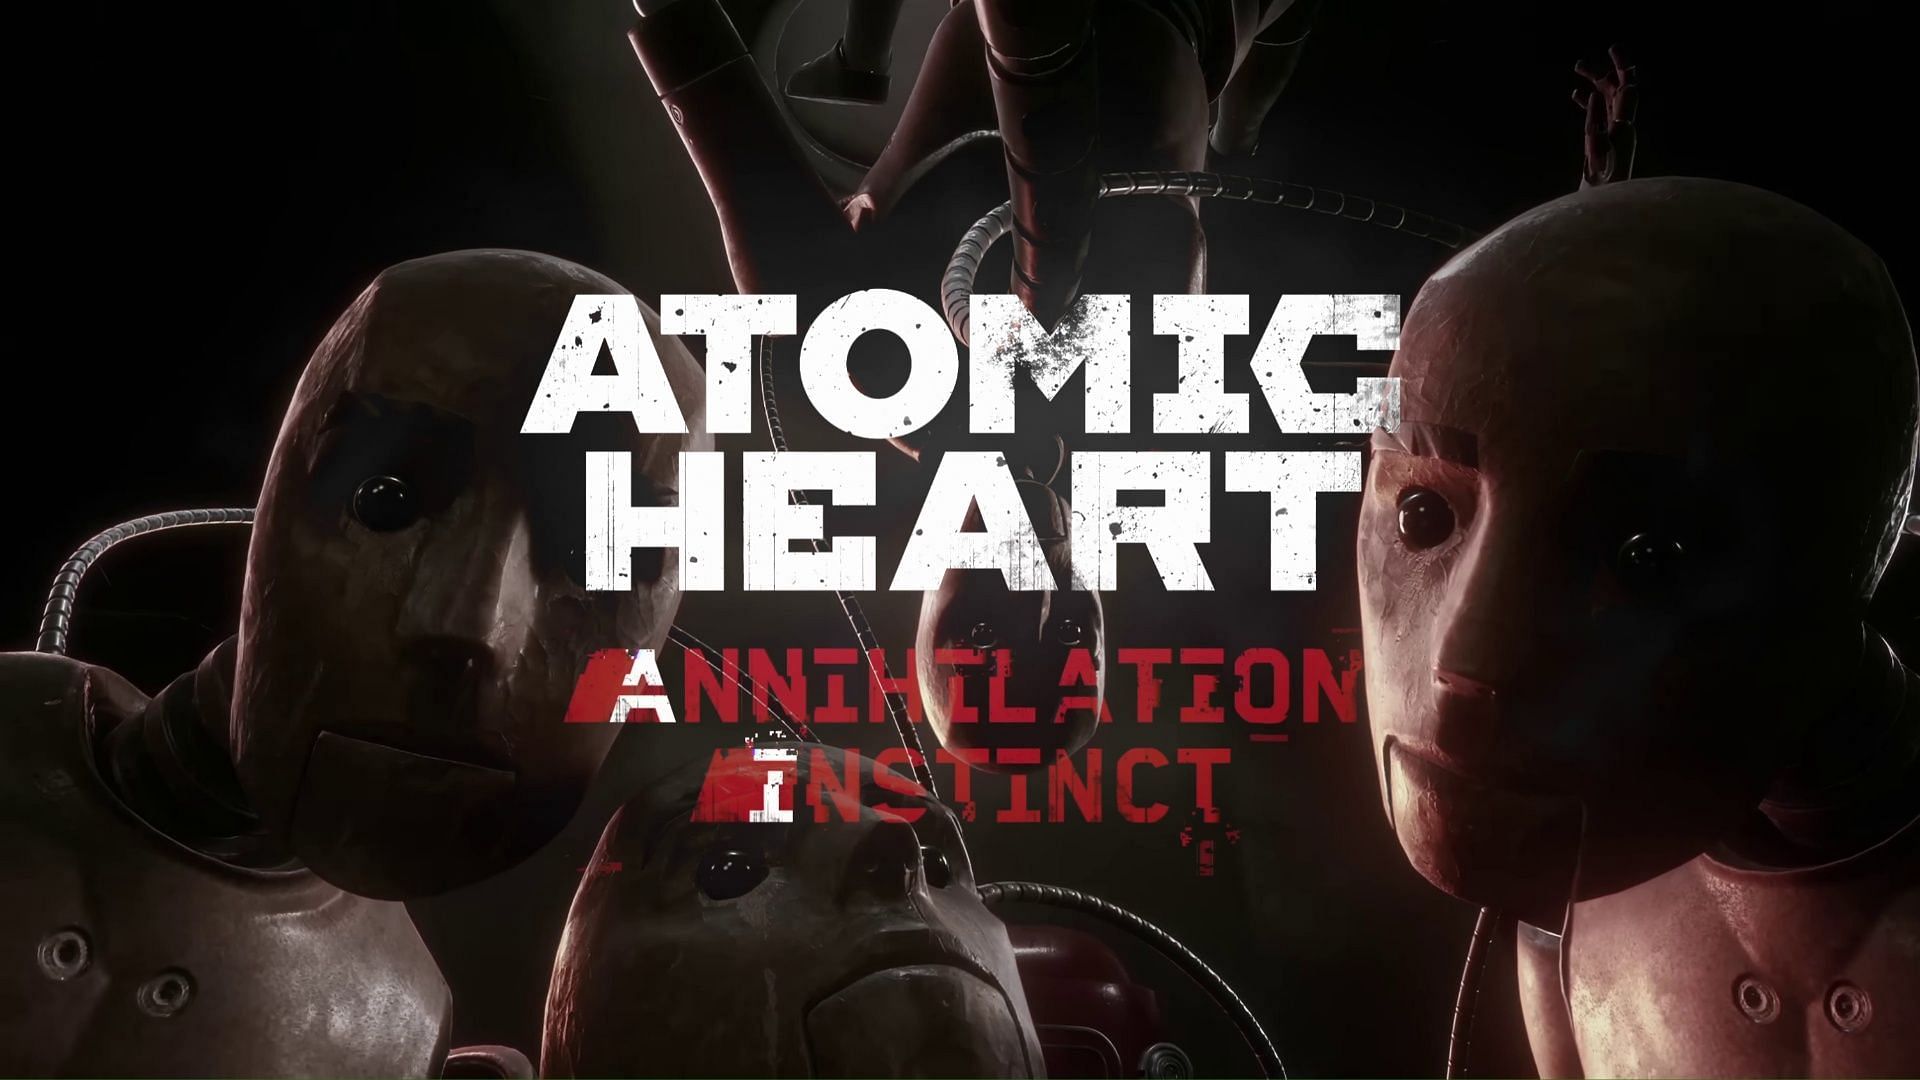 Atomic Heart - BEA-D DLC release date revealed